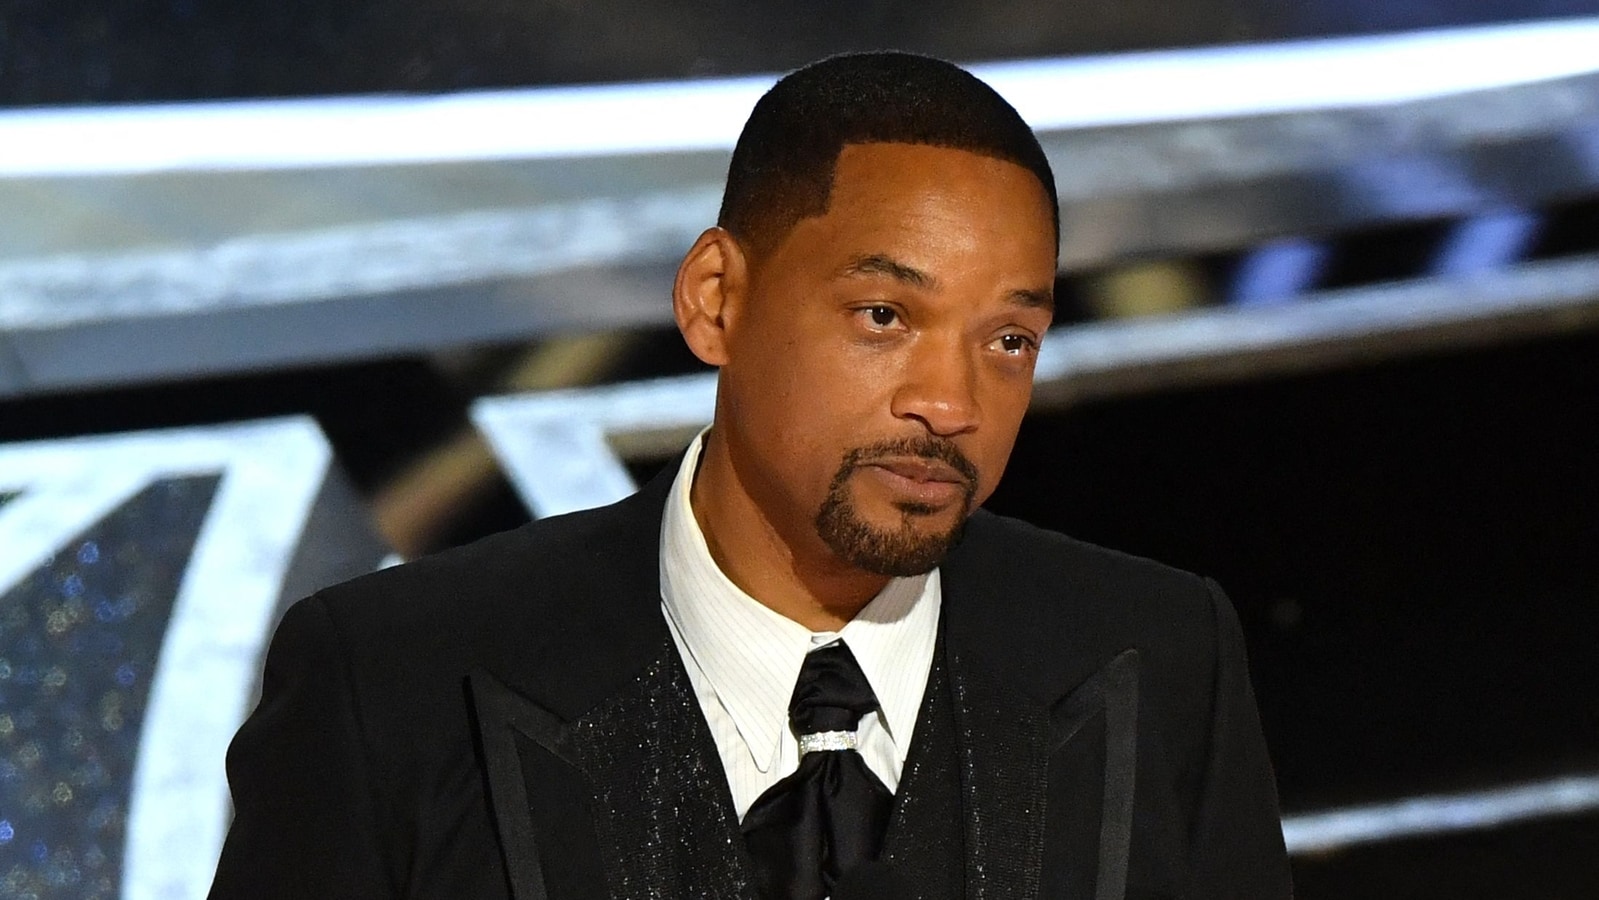 Police offered to arrest Will Smith, Oscars producer reveals behind the scenes